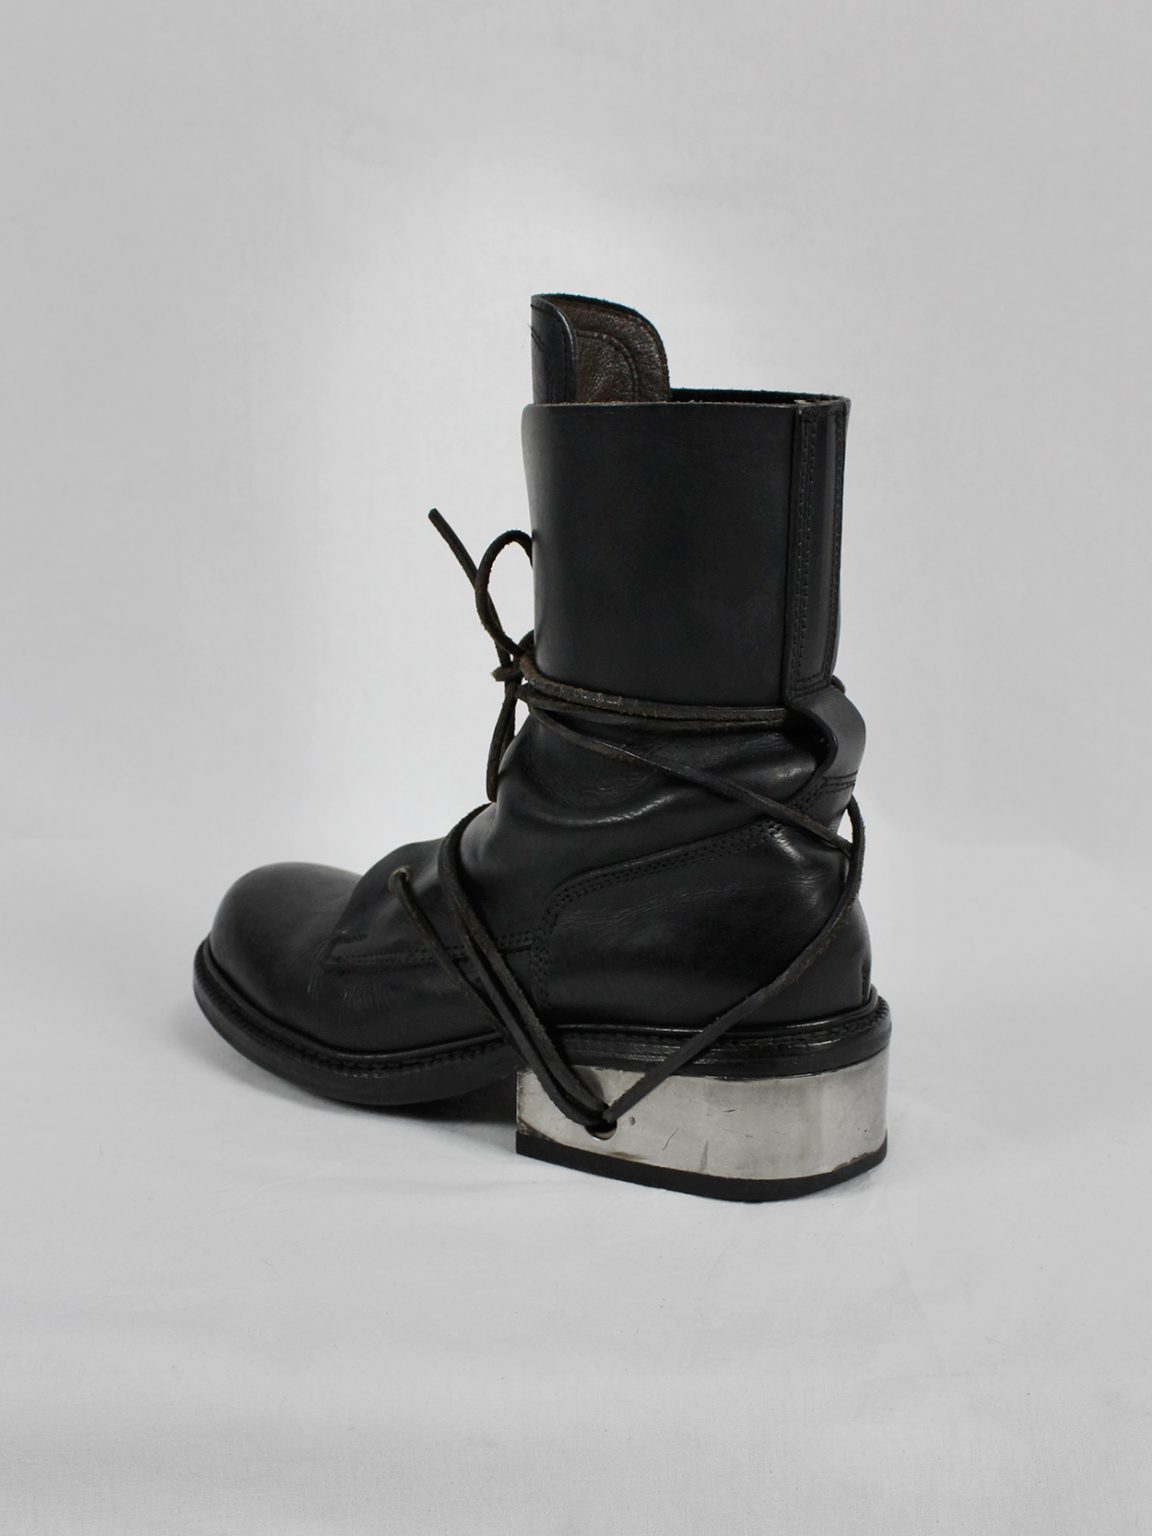 Dirk Bikkembergs black tall boots with laces through the metal heel (39) — late 90's